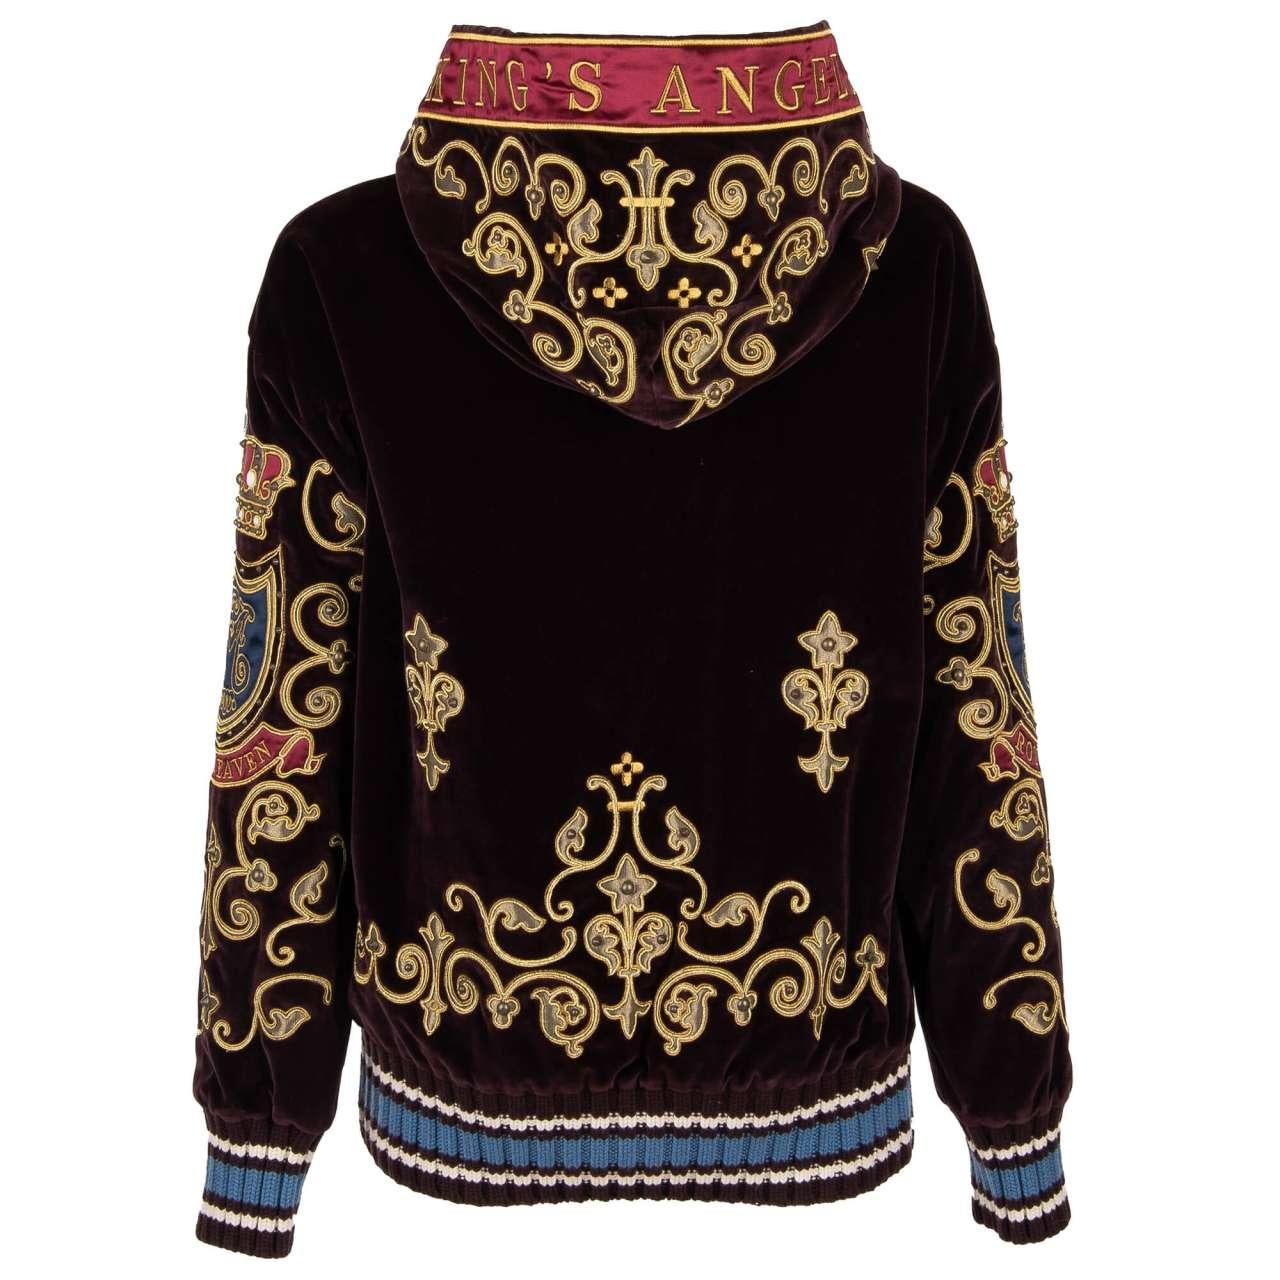 D&G Velvet Hoody Sweater with San Michele Crown King Embroidery Bordeaux Gold 46 In Excellent Condition For Sale In Erkrath, DE